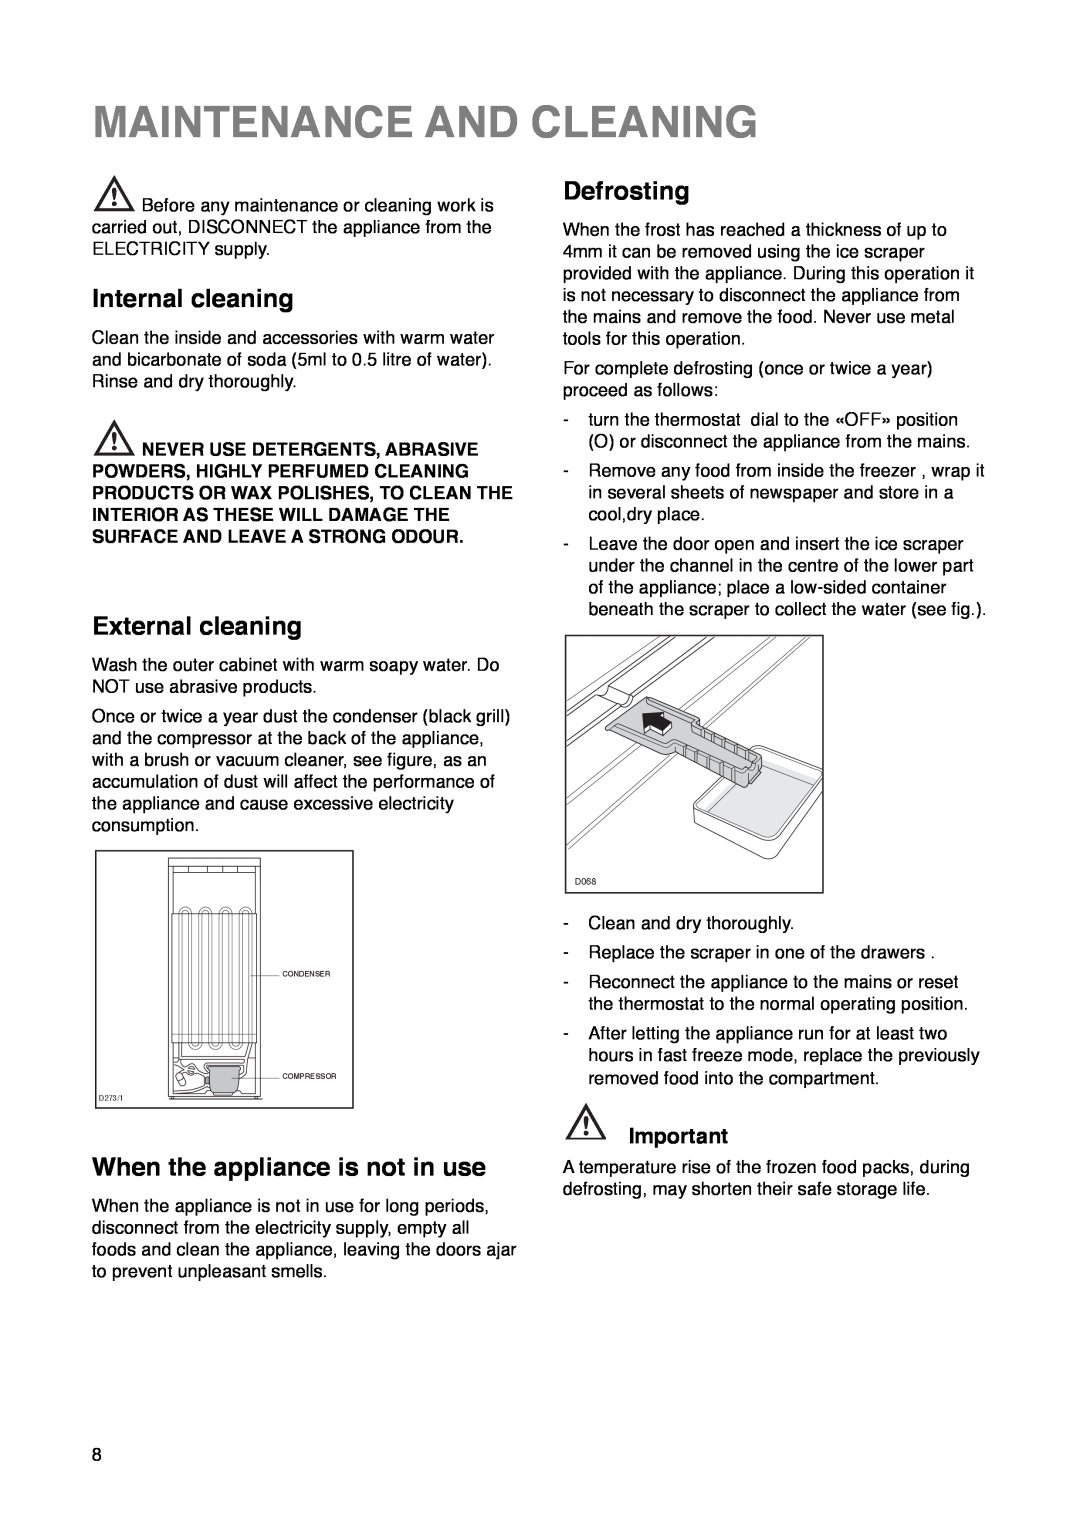 Zanussi ZF 67 Maintenance And Cleaning, Internal cleaning, External cleaning, Defrosting, When the appliance is not in use 